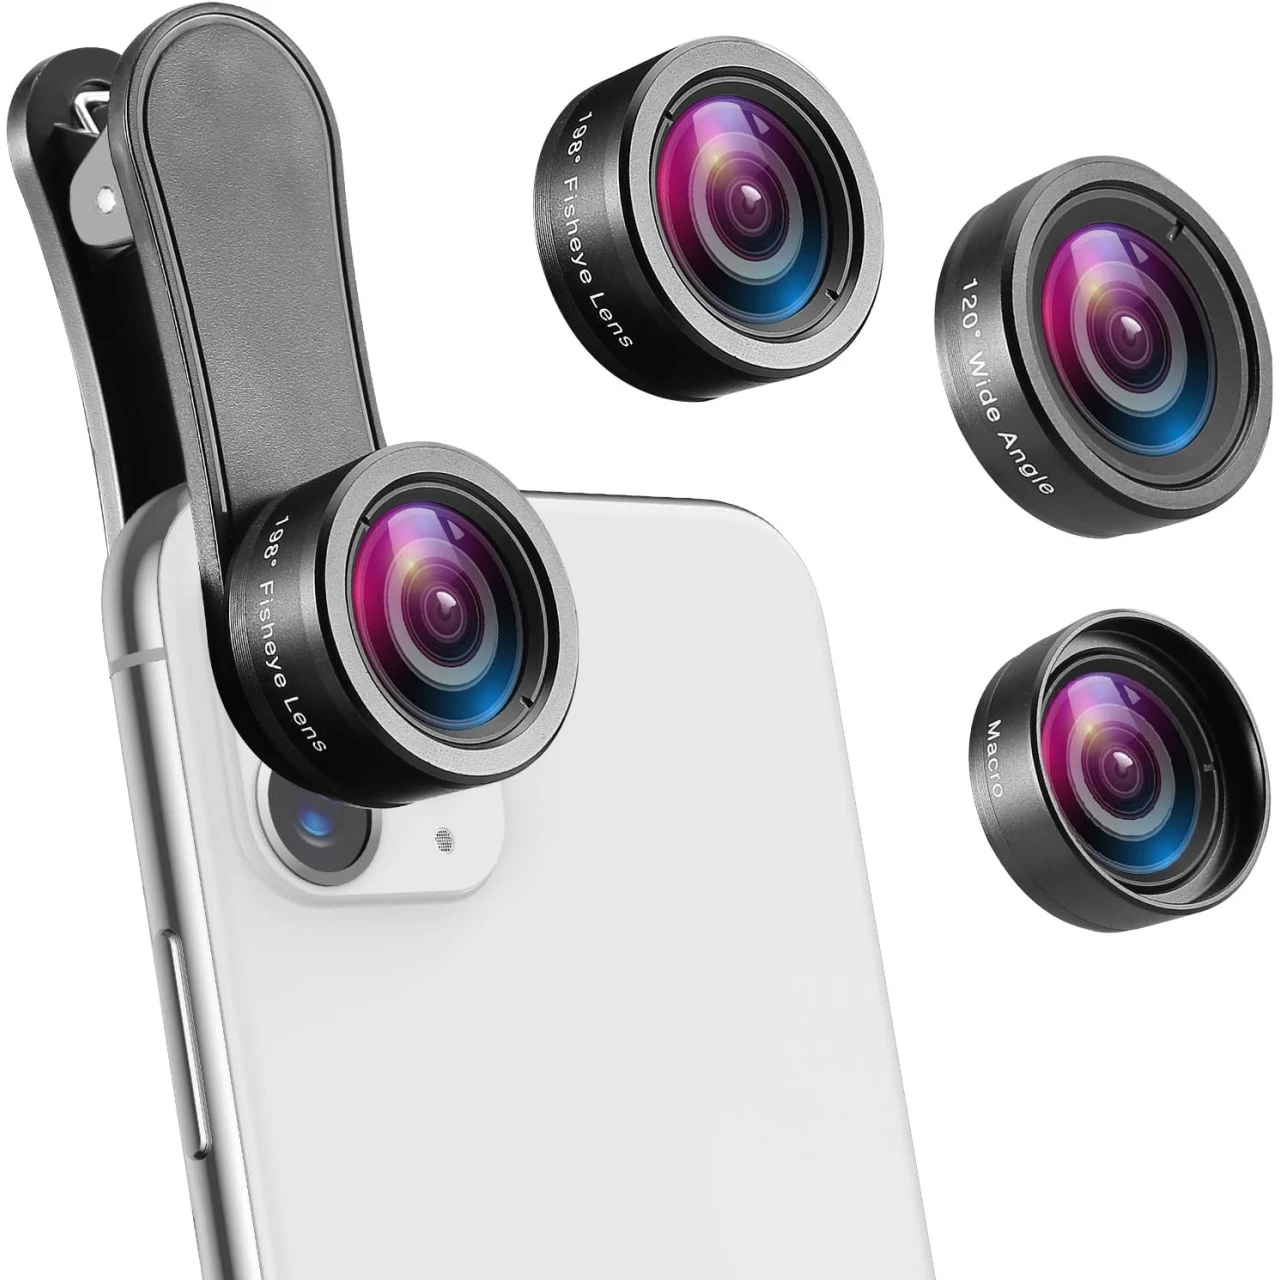 Criacr Phone Camera Lens, 198° Fisheye Lens, 15X Macro Lens, 0.65X Wide Angle Lens, Clip-On 3 in 1 Cell Phone Lens for Live Video, Compatible with iPhone 11 Pro, X XR, Samsung, Other Smartphones